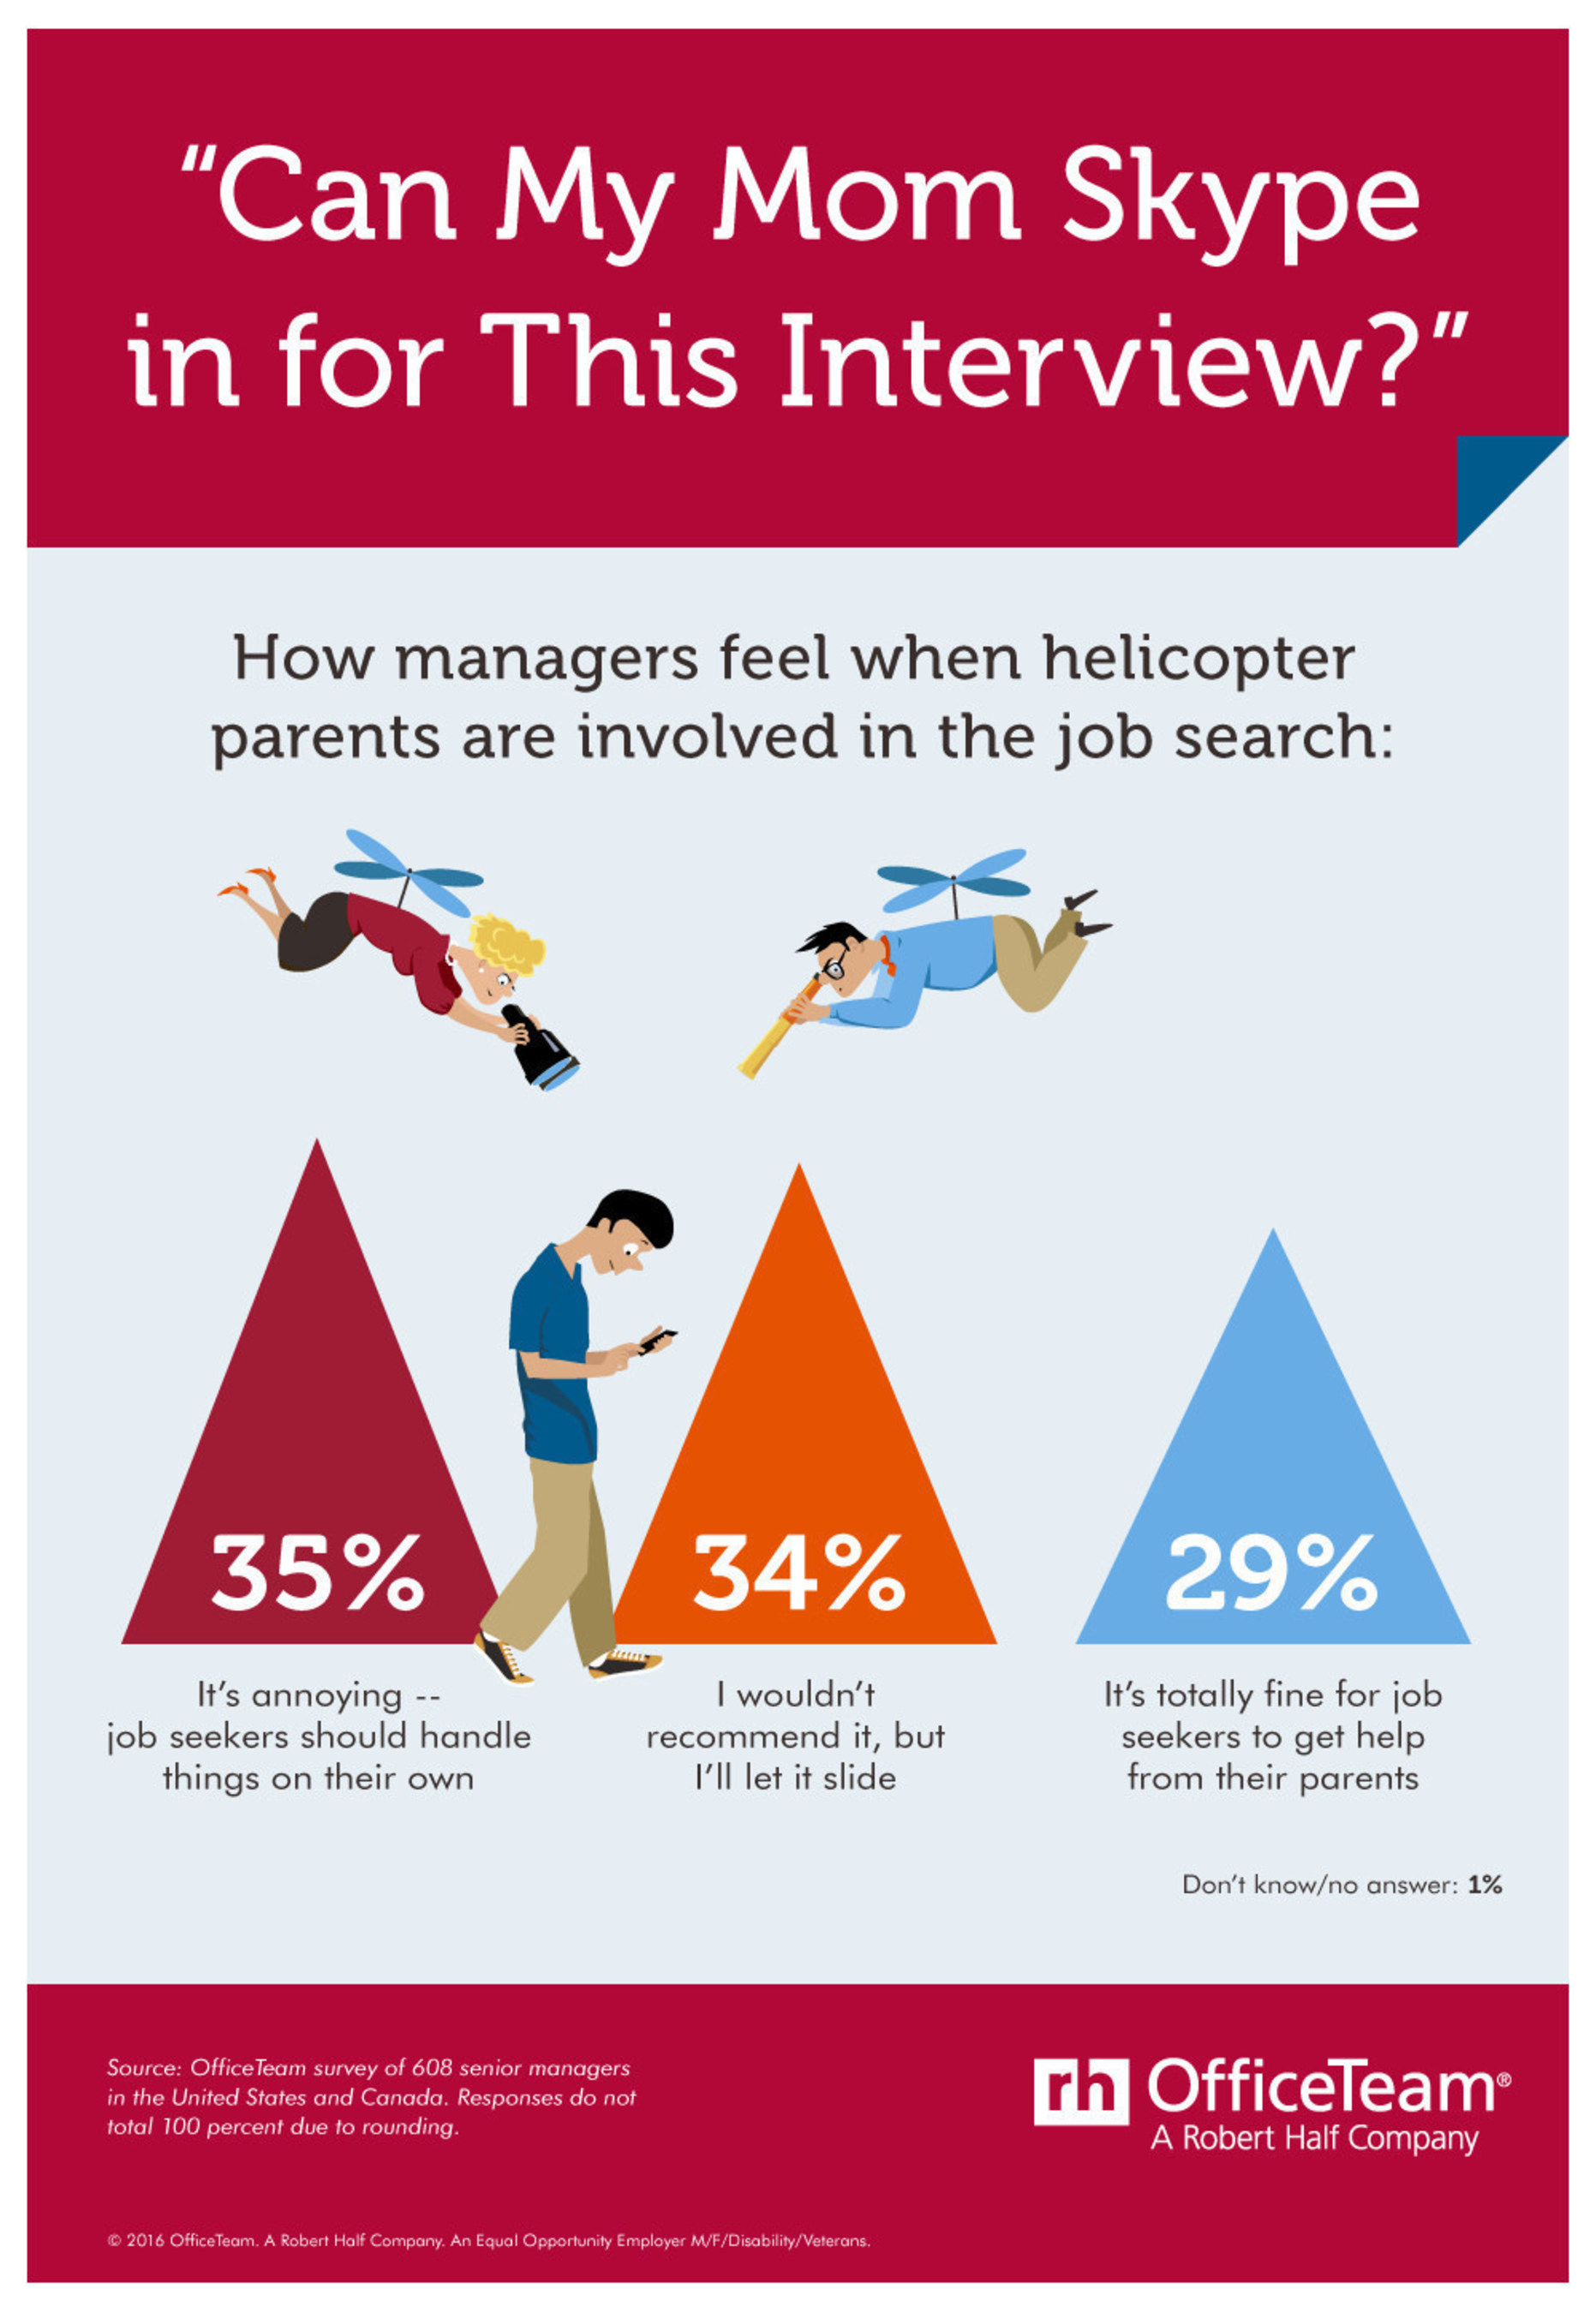 Do helicopter parents help or hurt job seekers? According to new research from staffing firm OfficeTeam, more than 1/3 (35%) of senior managers said they find it annoying when parents are involved in their kids' search for work. Another 1/3 (34%) prefer mom and dad stay out of the job hunt,  but would let it slide. Only 29 percent said this parental guidance is not a problem.